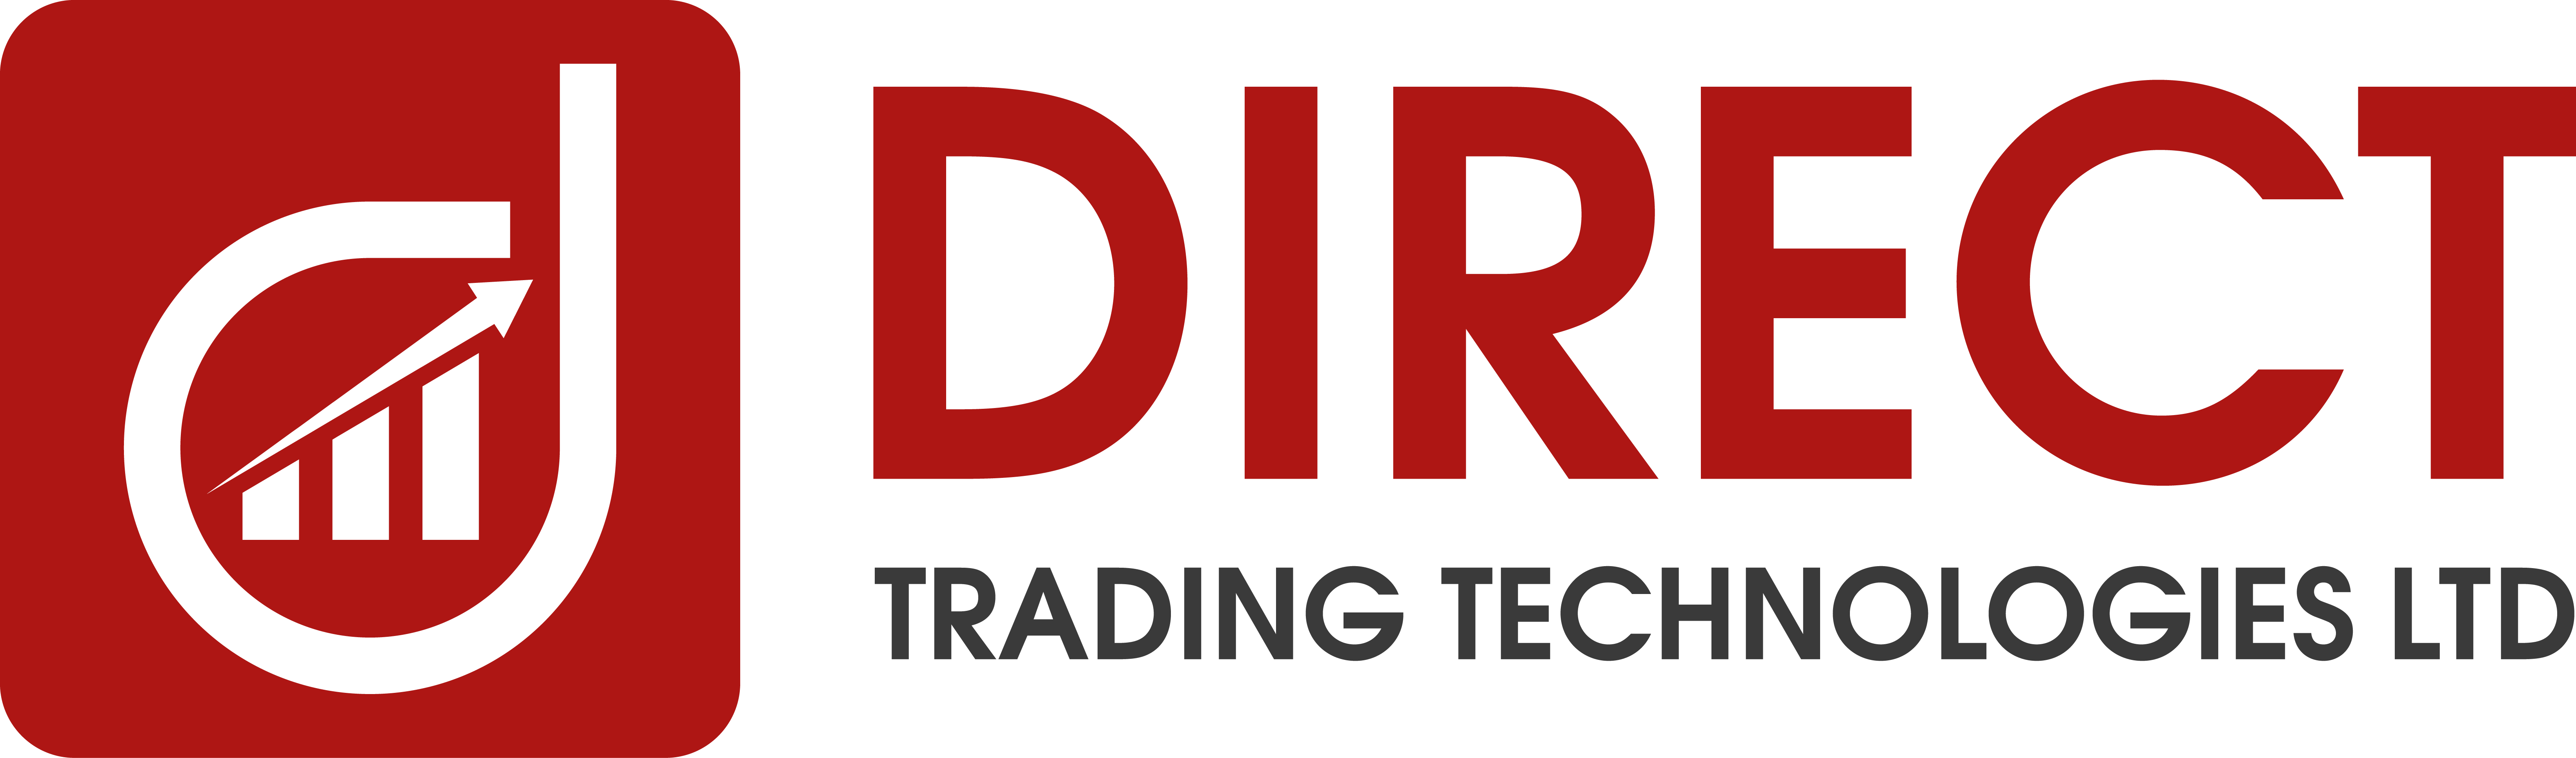 DIRECT TRADING TECHNOLOGIES 